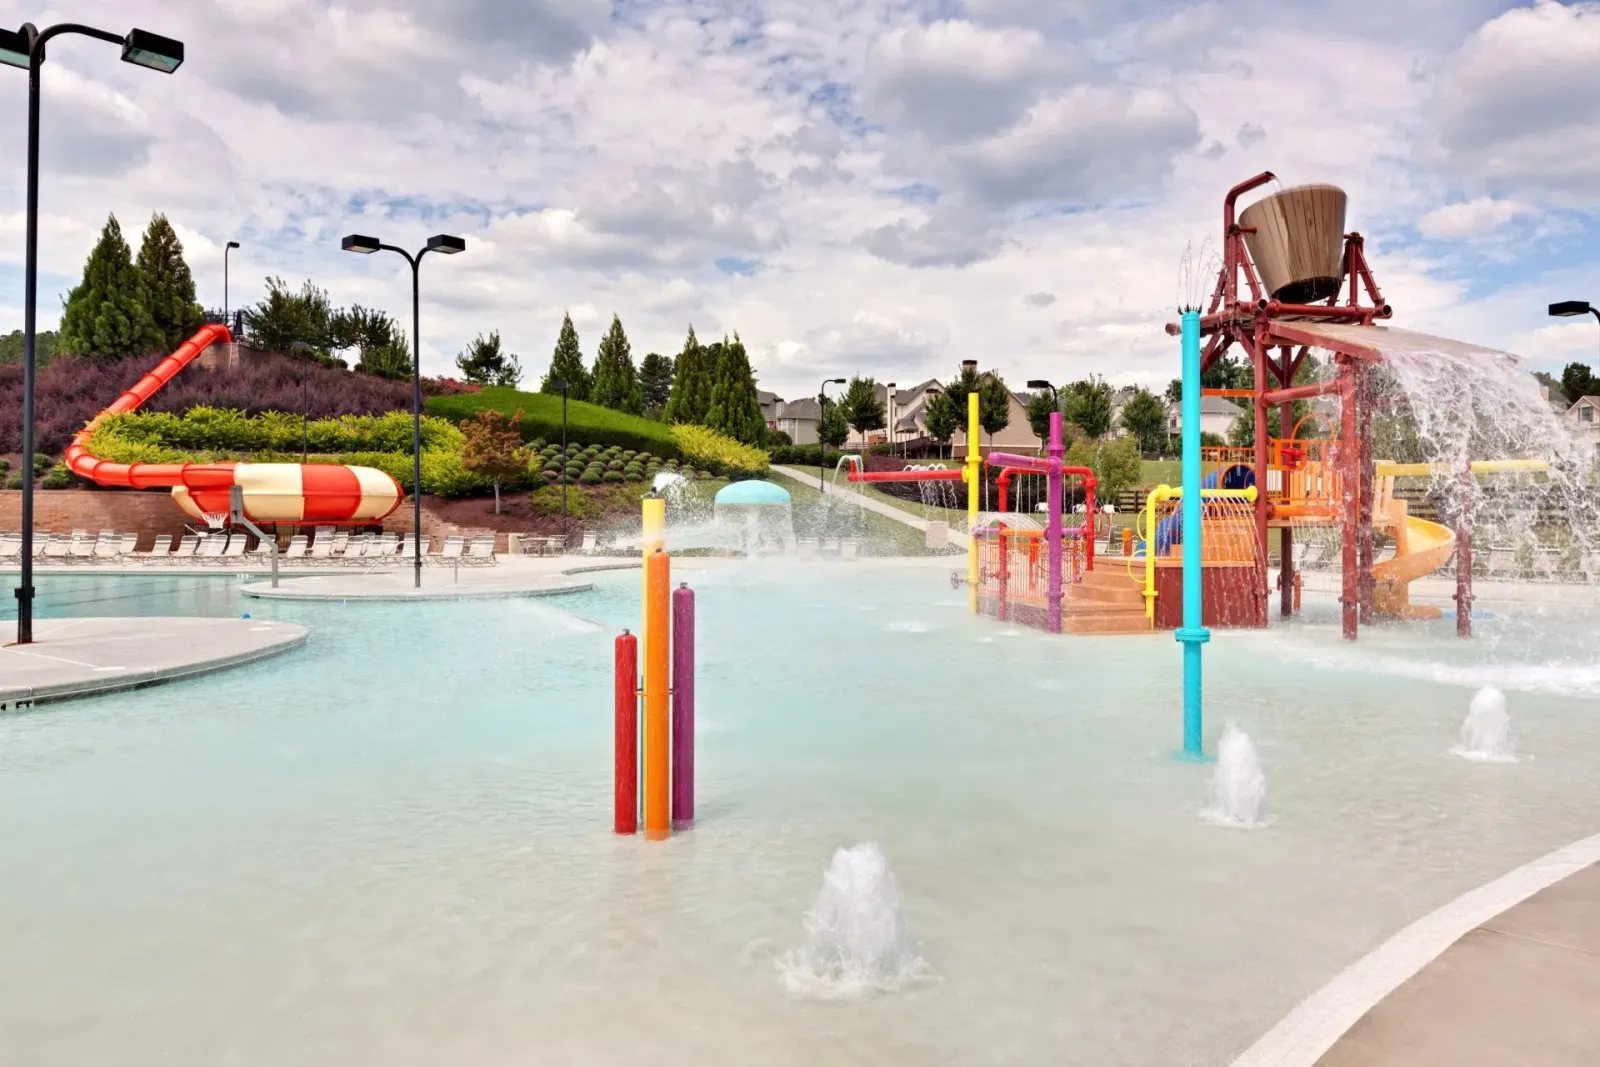 lots of water play areas at the community pool